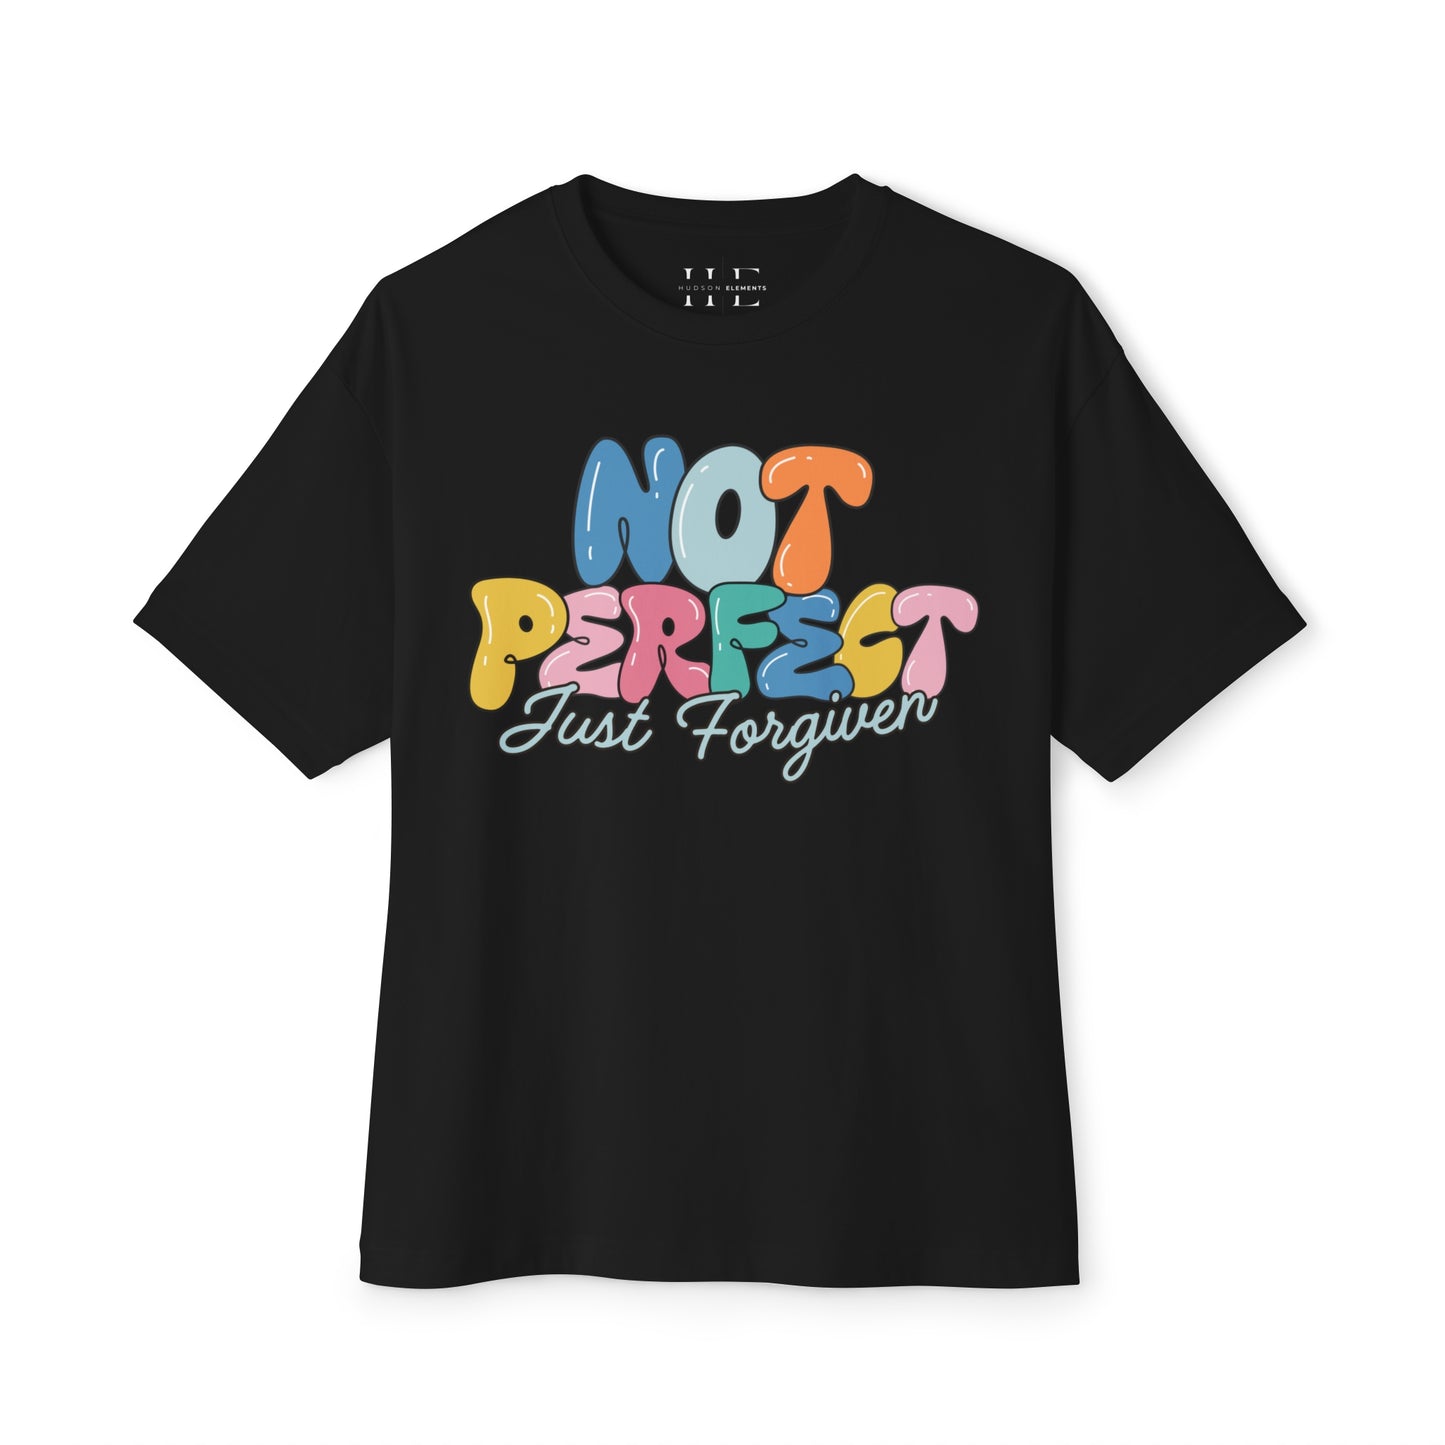 "Not Perfect" Adult Unisex Boxy Tee